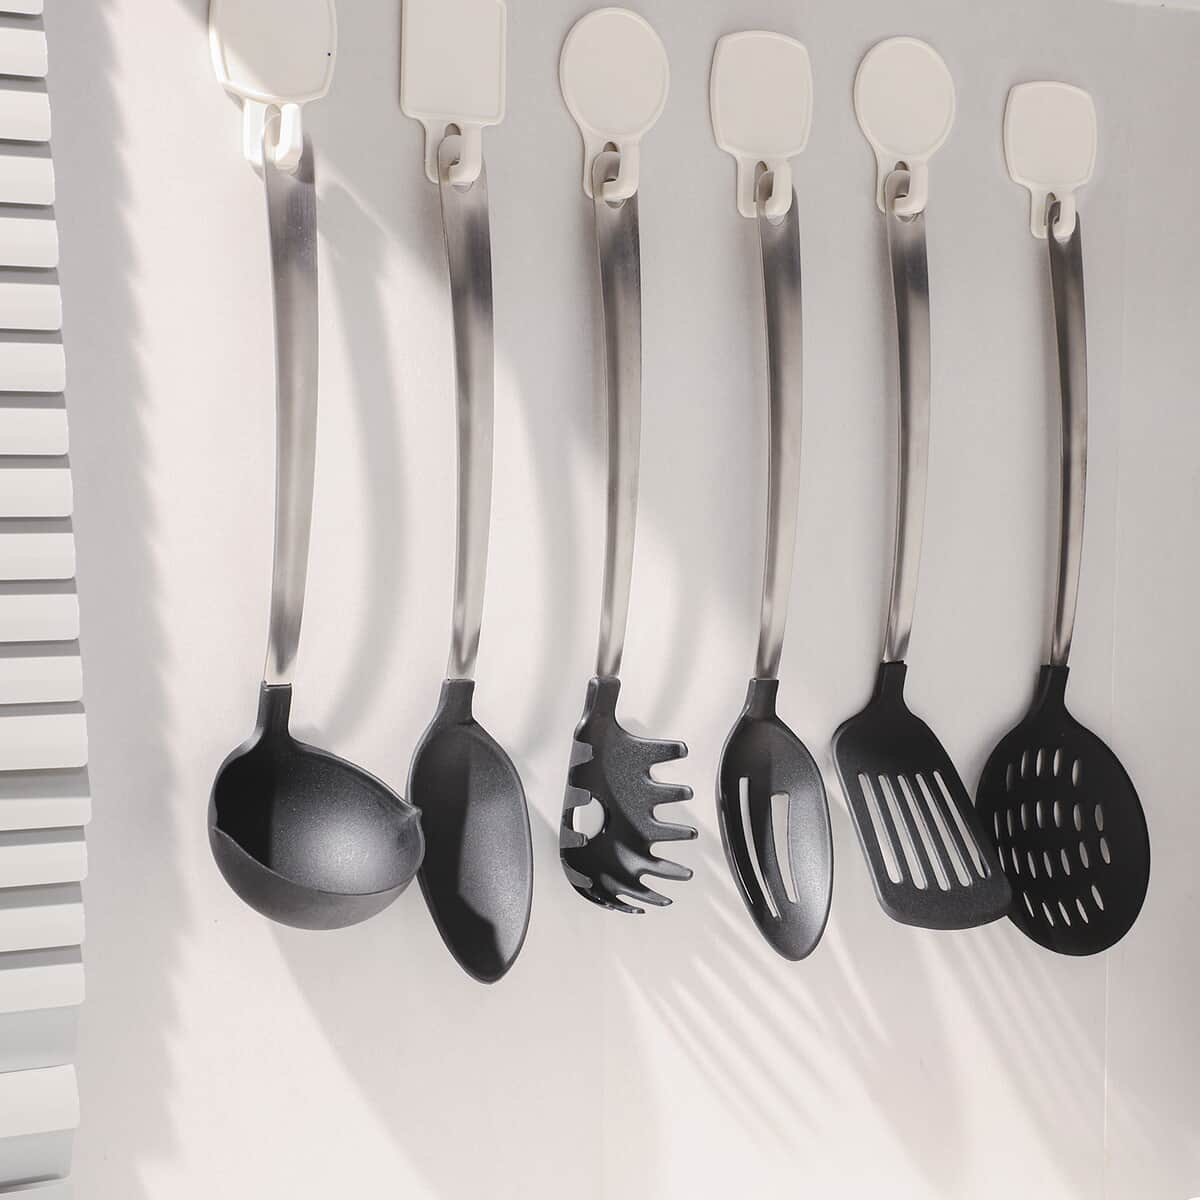 Set of 6 Stainless Steel with Nylon on The Top Laddle, Spaghetti Spoon, Slotted Turner, Slotted Spoon, Basting Spoon, Skimmer image number 5